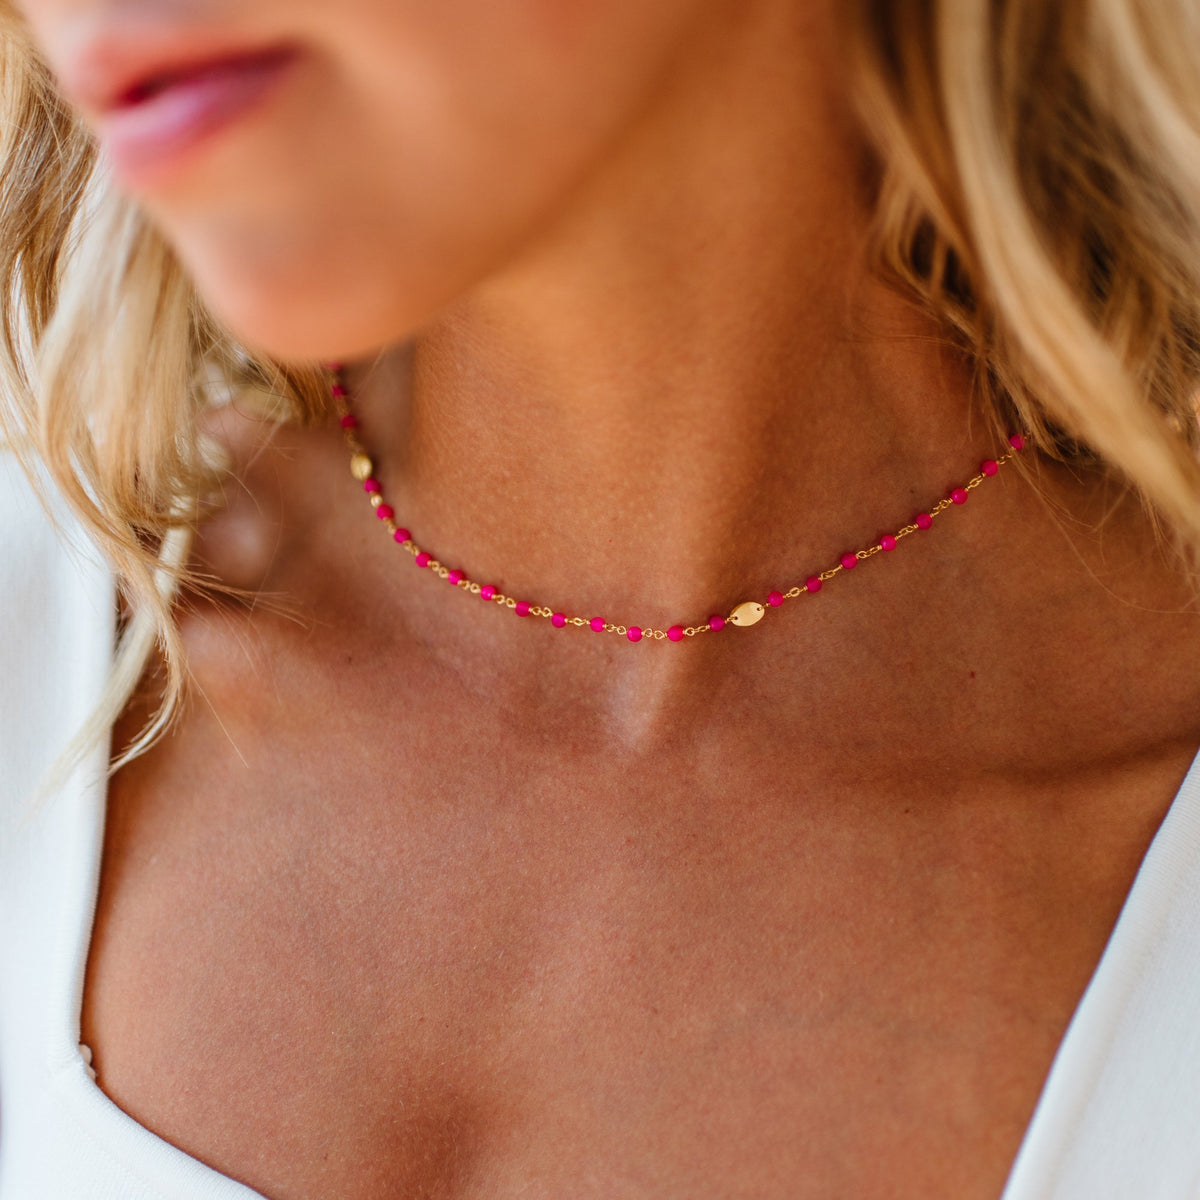 ICONIC SHORT BEADED NECKLACE - HOT PINK CHALCEDONY &amp; GOLD 16-20&quot; - SO PRETTY CARA COTTER